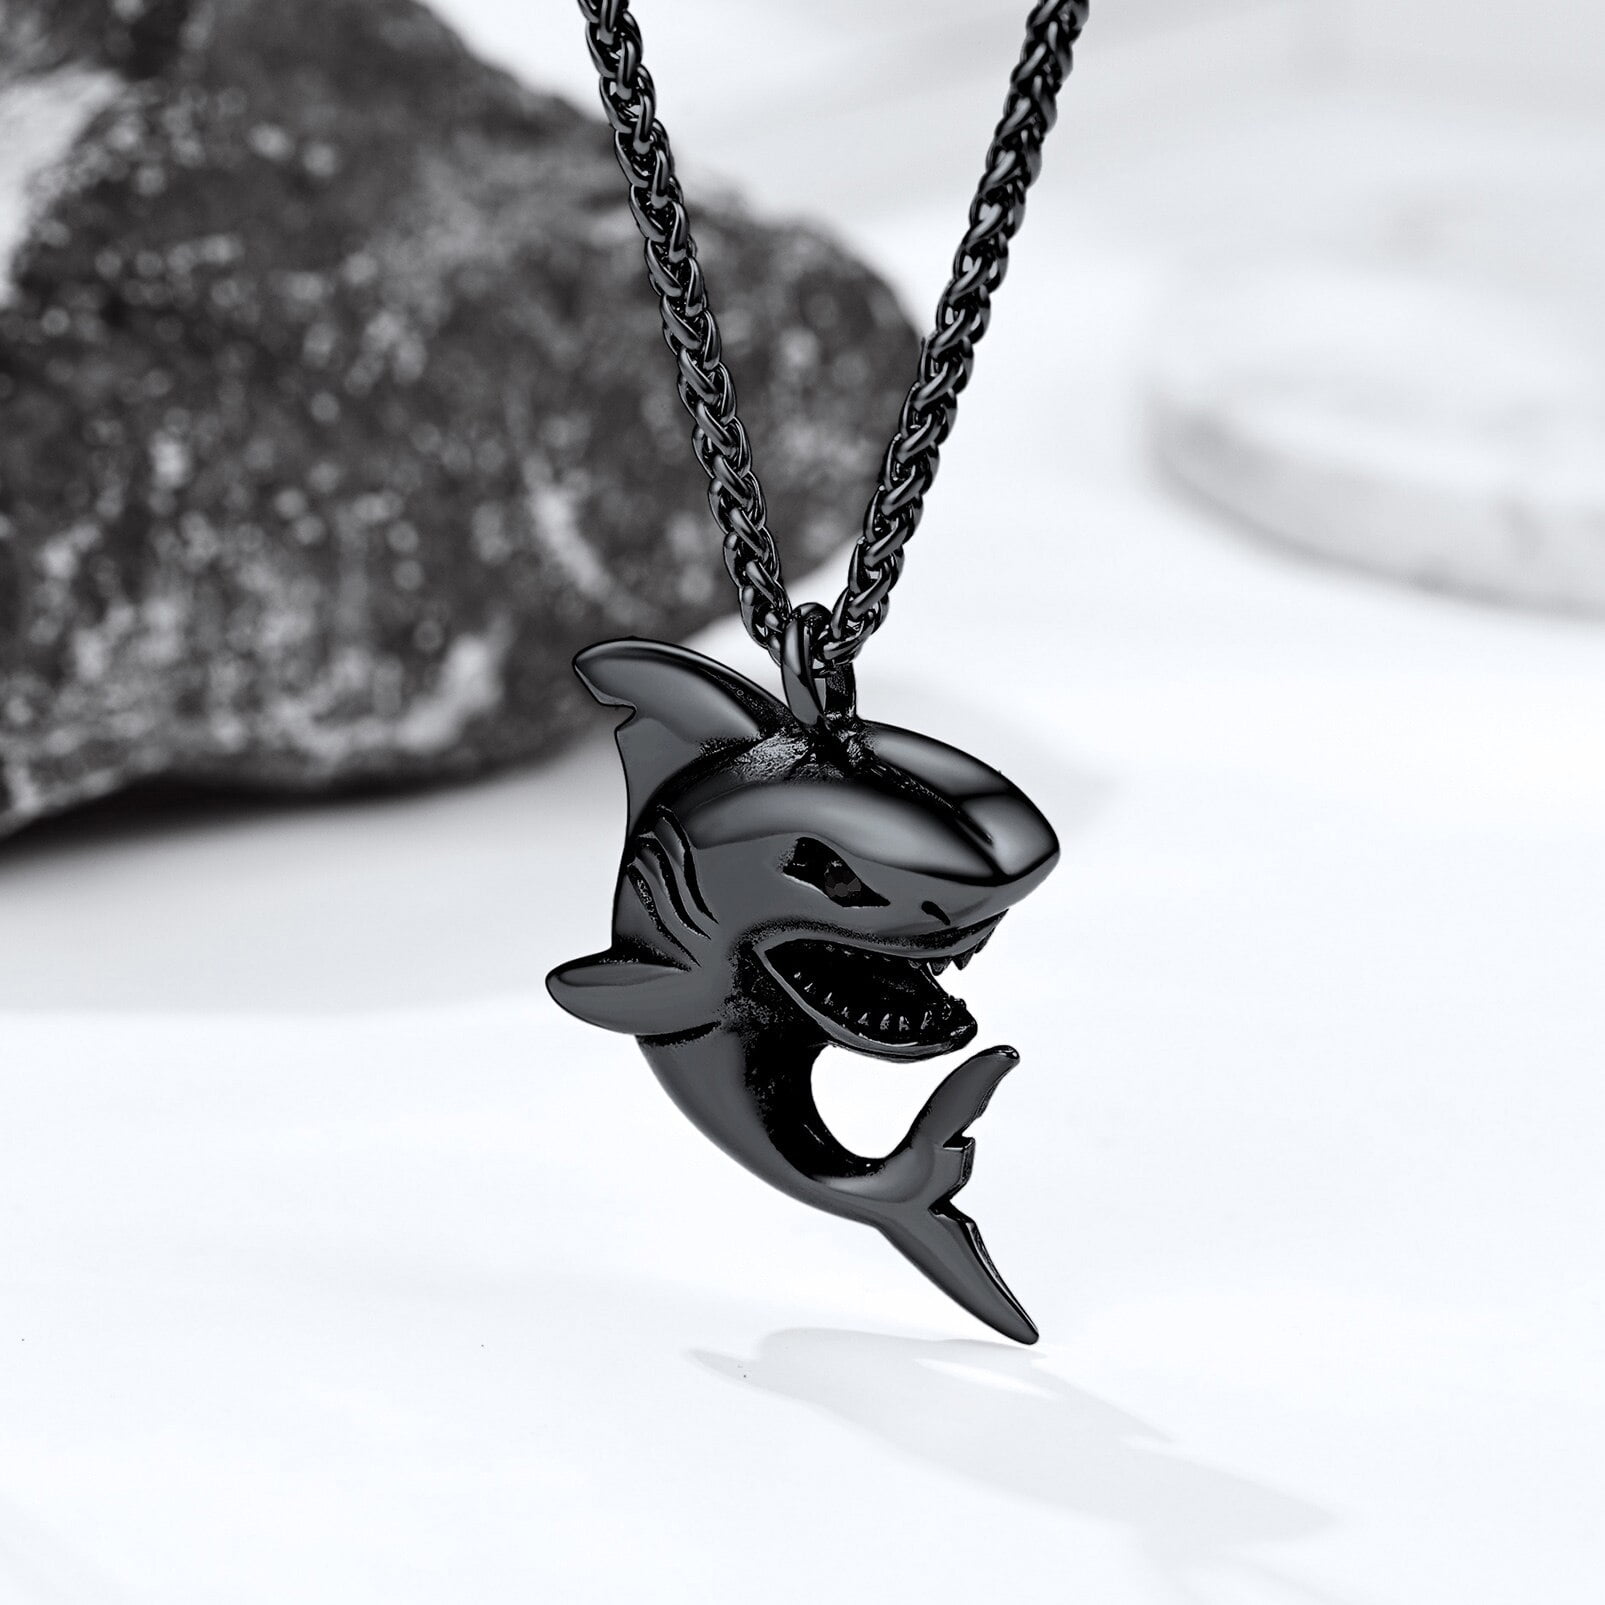 Iced Out Open Mouth Shark Pendant | Shark pendant, Hip hop jewelry, Pendant